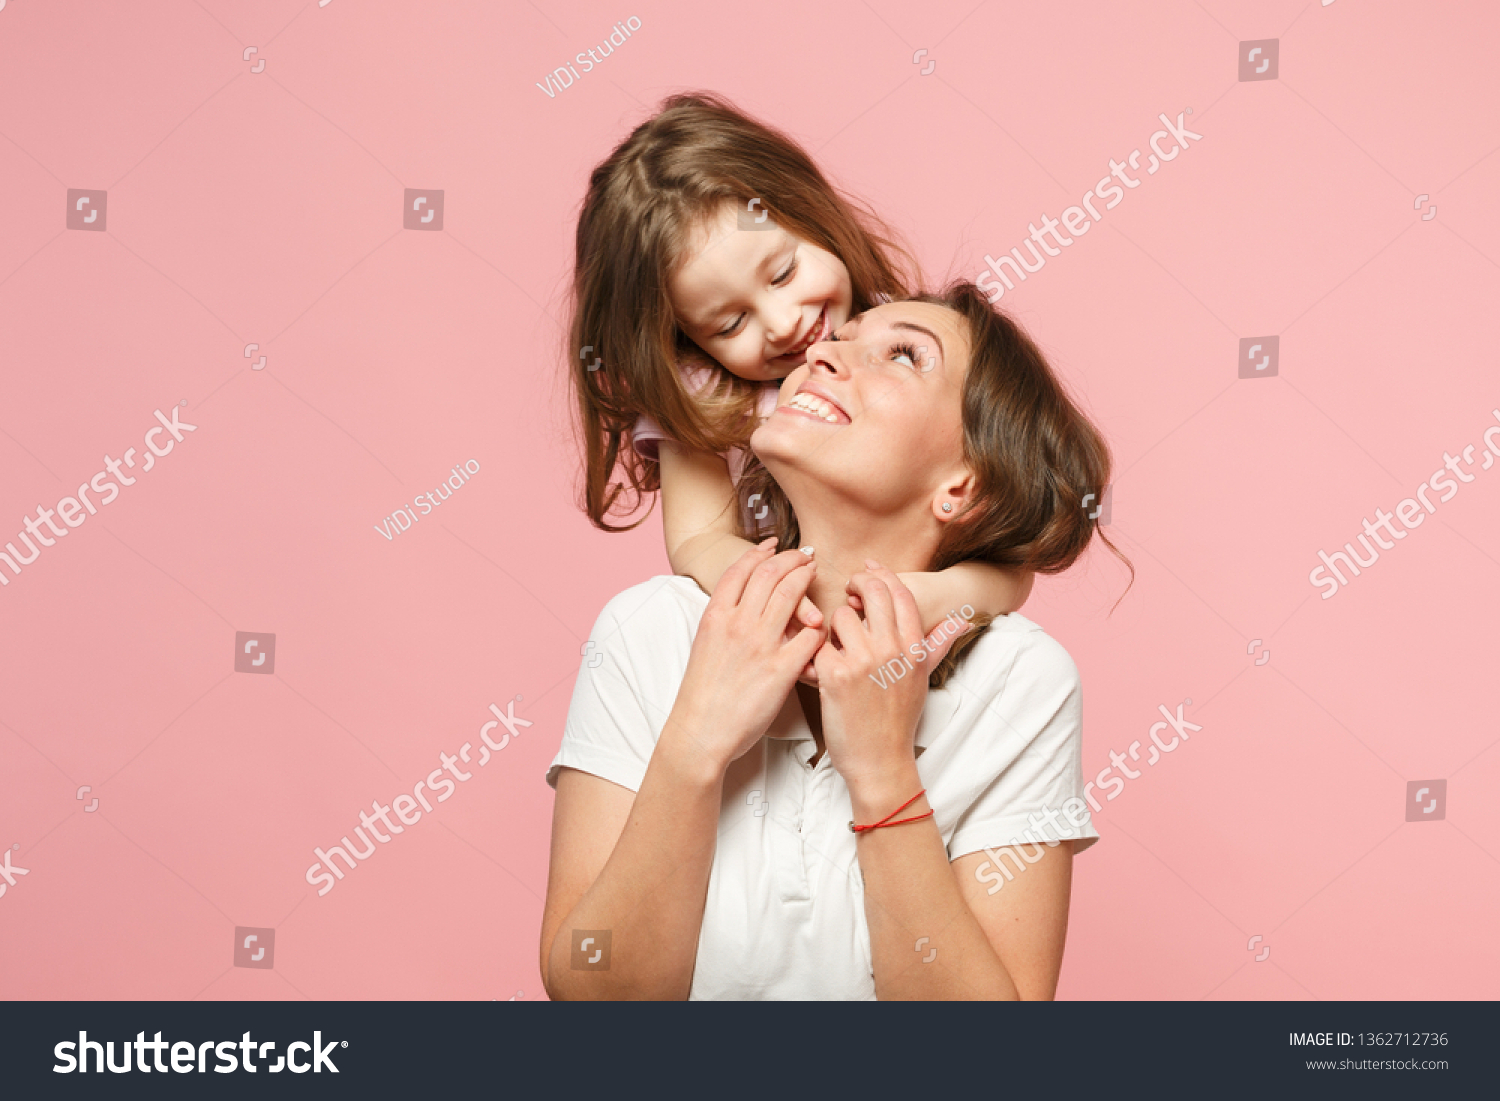 Woman mama in light clothes have fun with cute child baby girl. Mother little kid daughter isolated on pastel pink wall background studio portrait Mother's Day love family parenthood childhood concept #1362712736